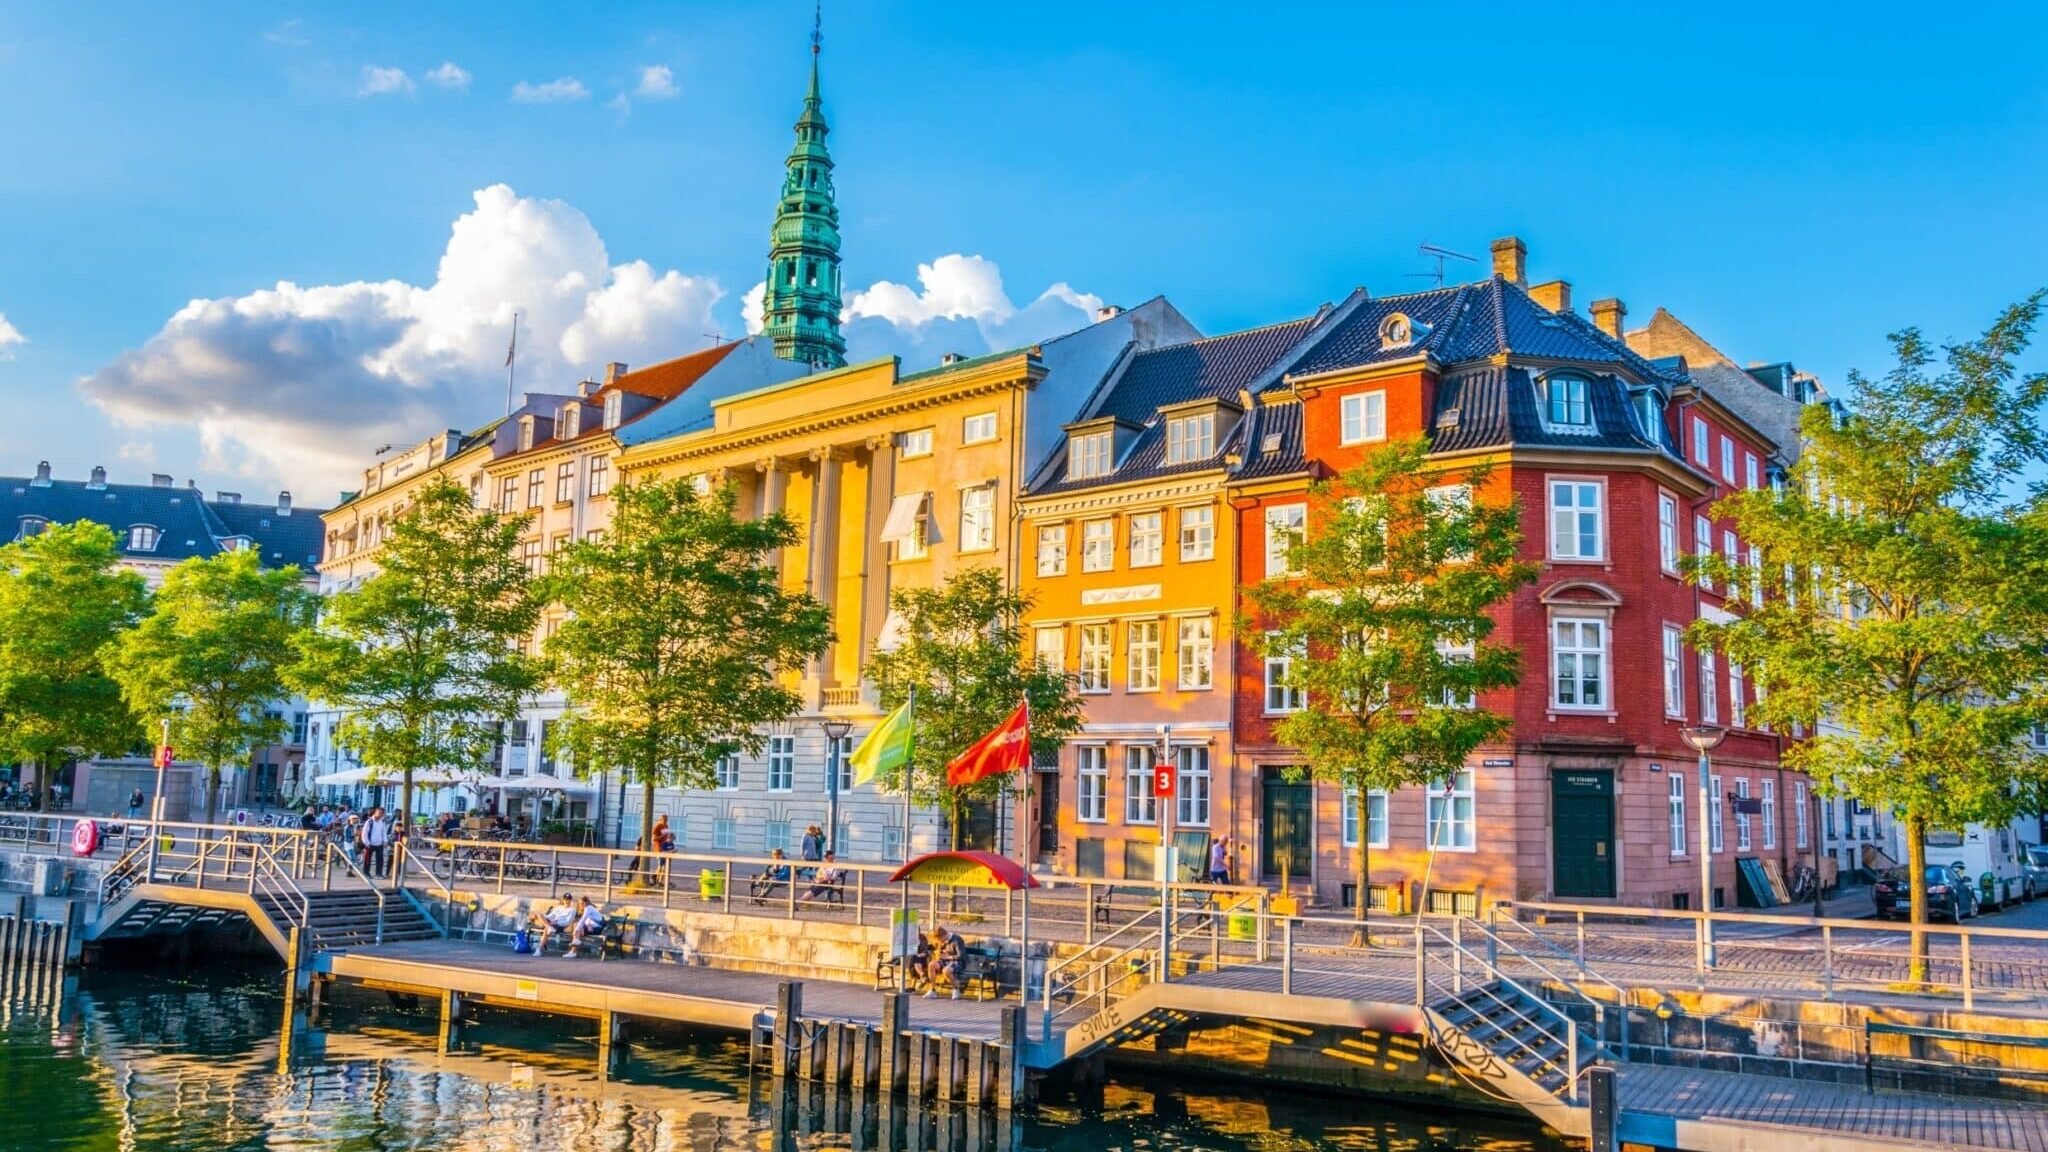 <p>A city full of canals, impressive churches, and Danish food, Copenhagen competes with Helsinki as one of the happiest cities in the world. Copenhagen offers stunning Danish cuisine, beautiful churches, and museums.</p> <p>With round-trip flights to Copenhagen ranging from $300 to $ 850, you can save extra cash, indulge in Danish culture, and keep your wallet happy too.</p>